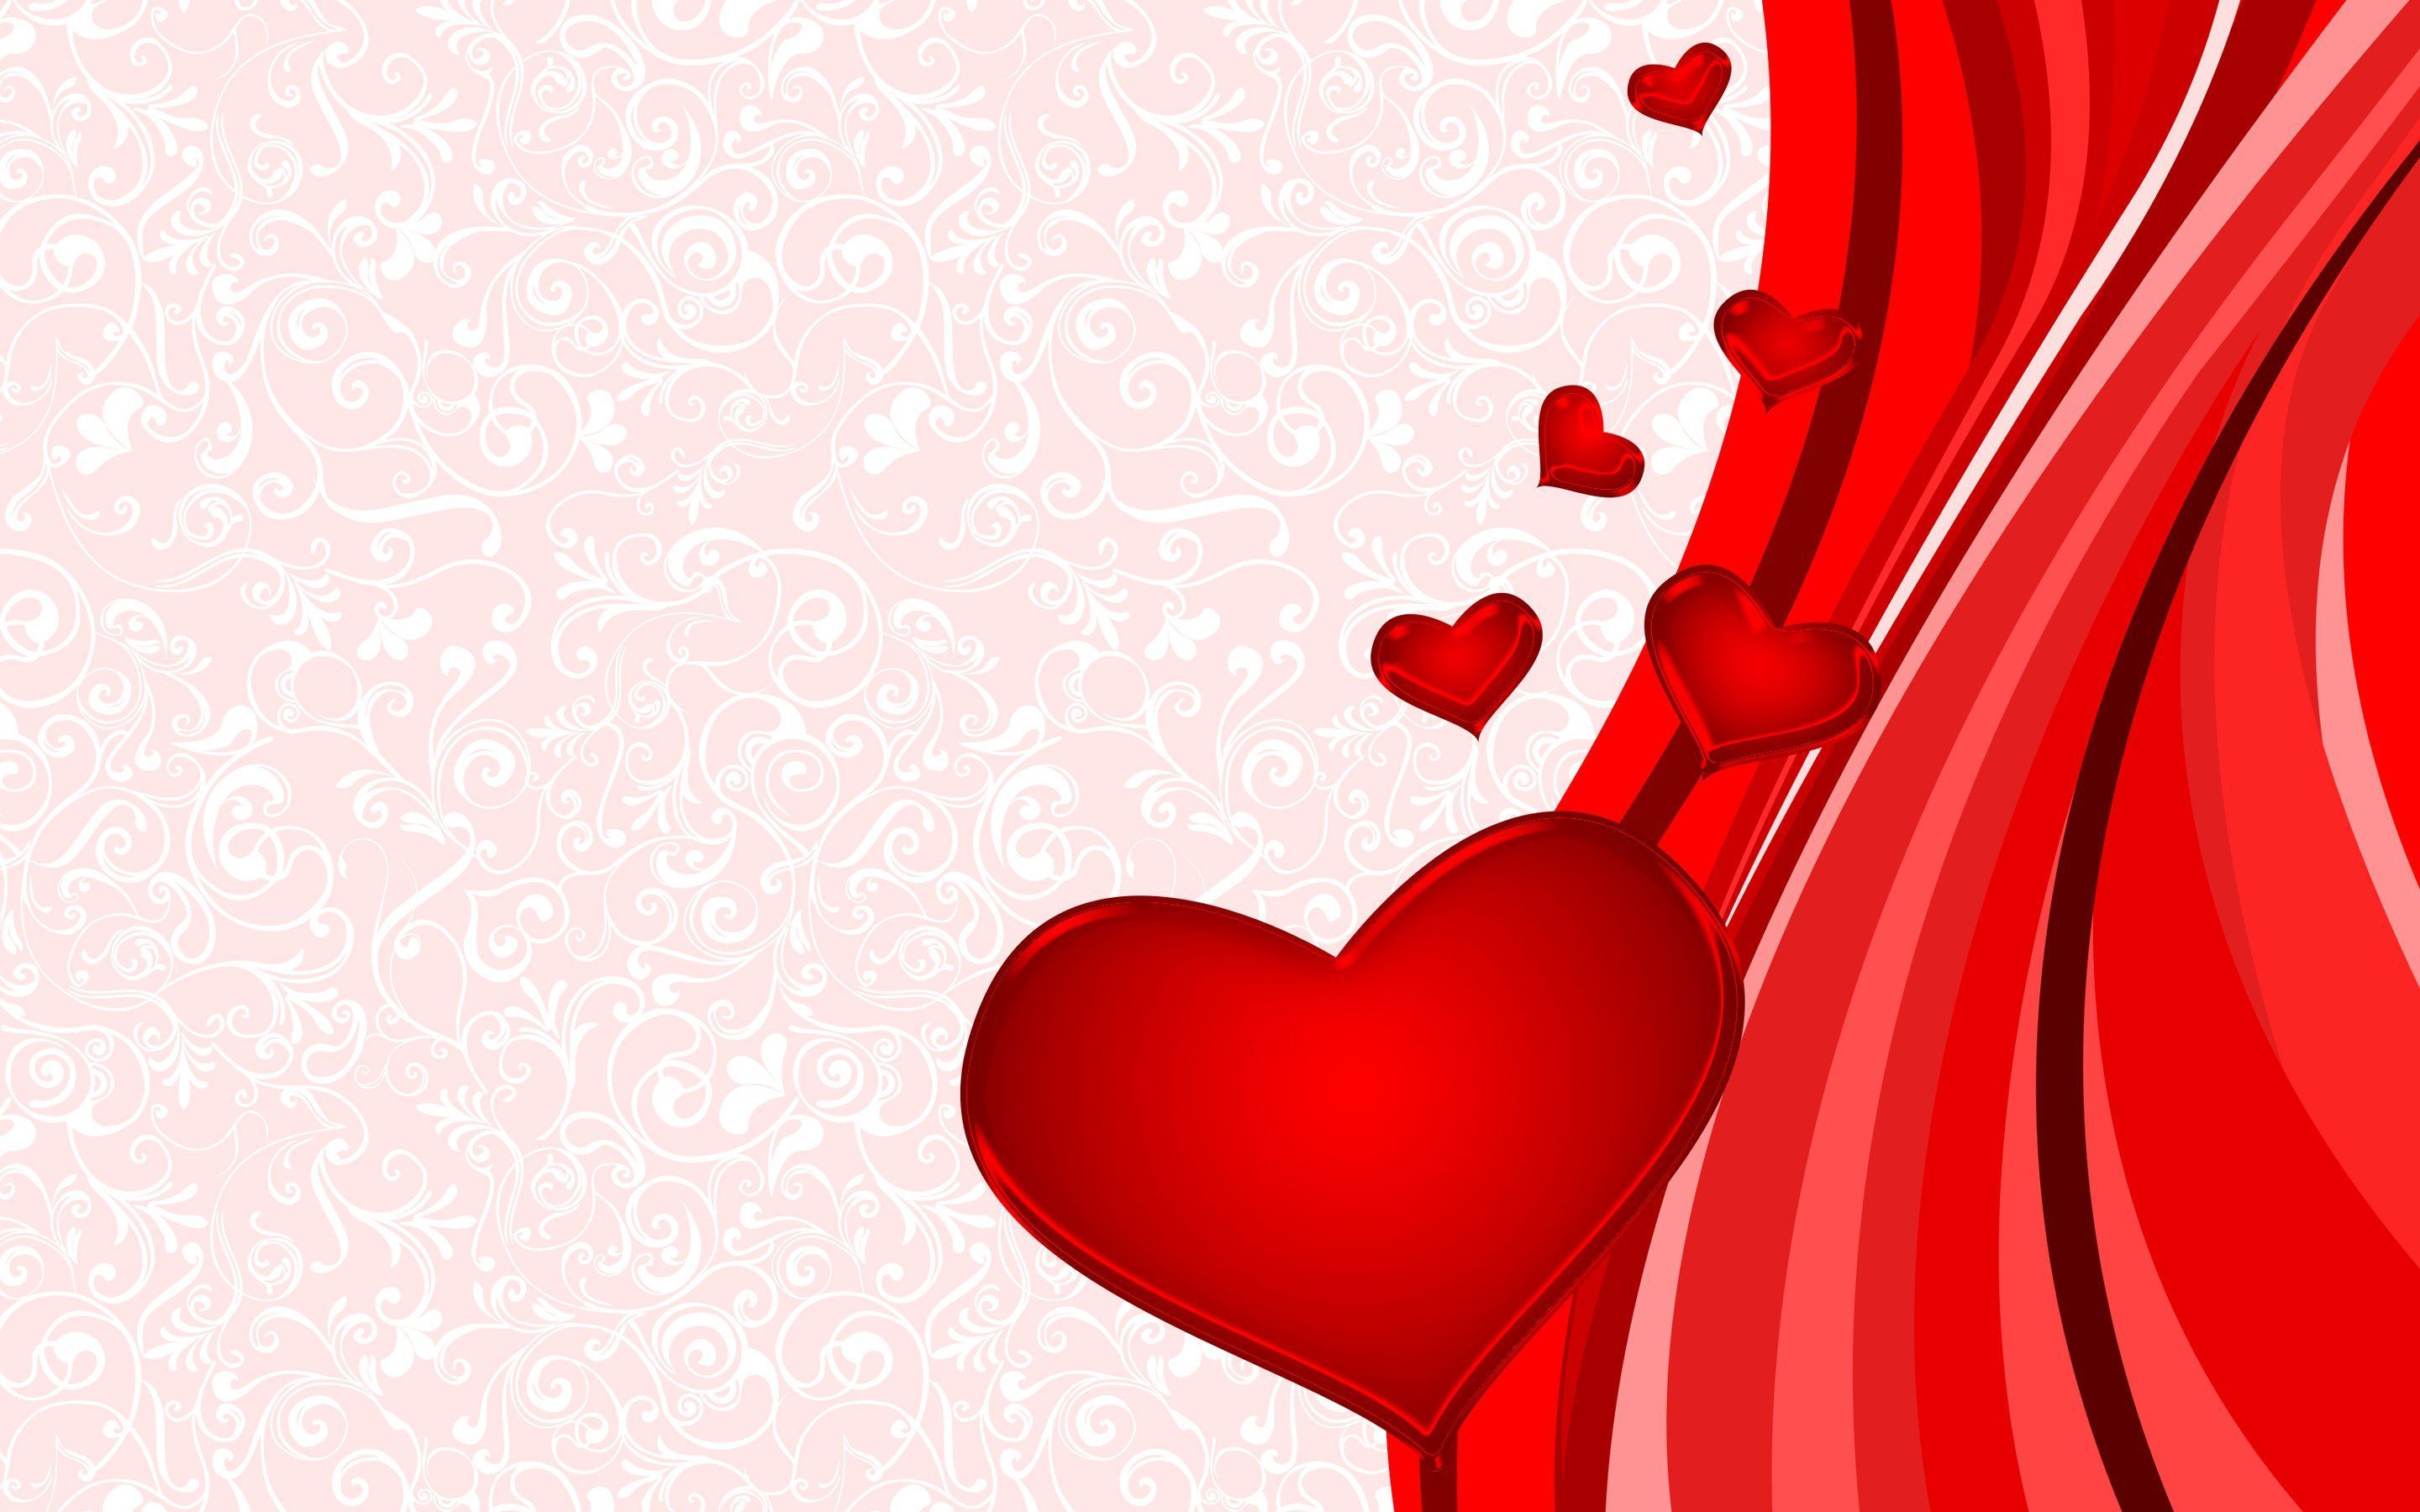 Valentine's Day hearts wallpaper Resolution 2880x1800 | Best Download this awesome wallpaper - Cool Wallpaper HD - CoolWallpaper-HD.com